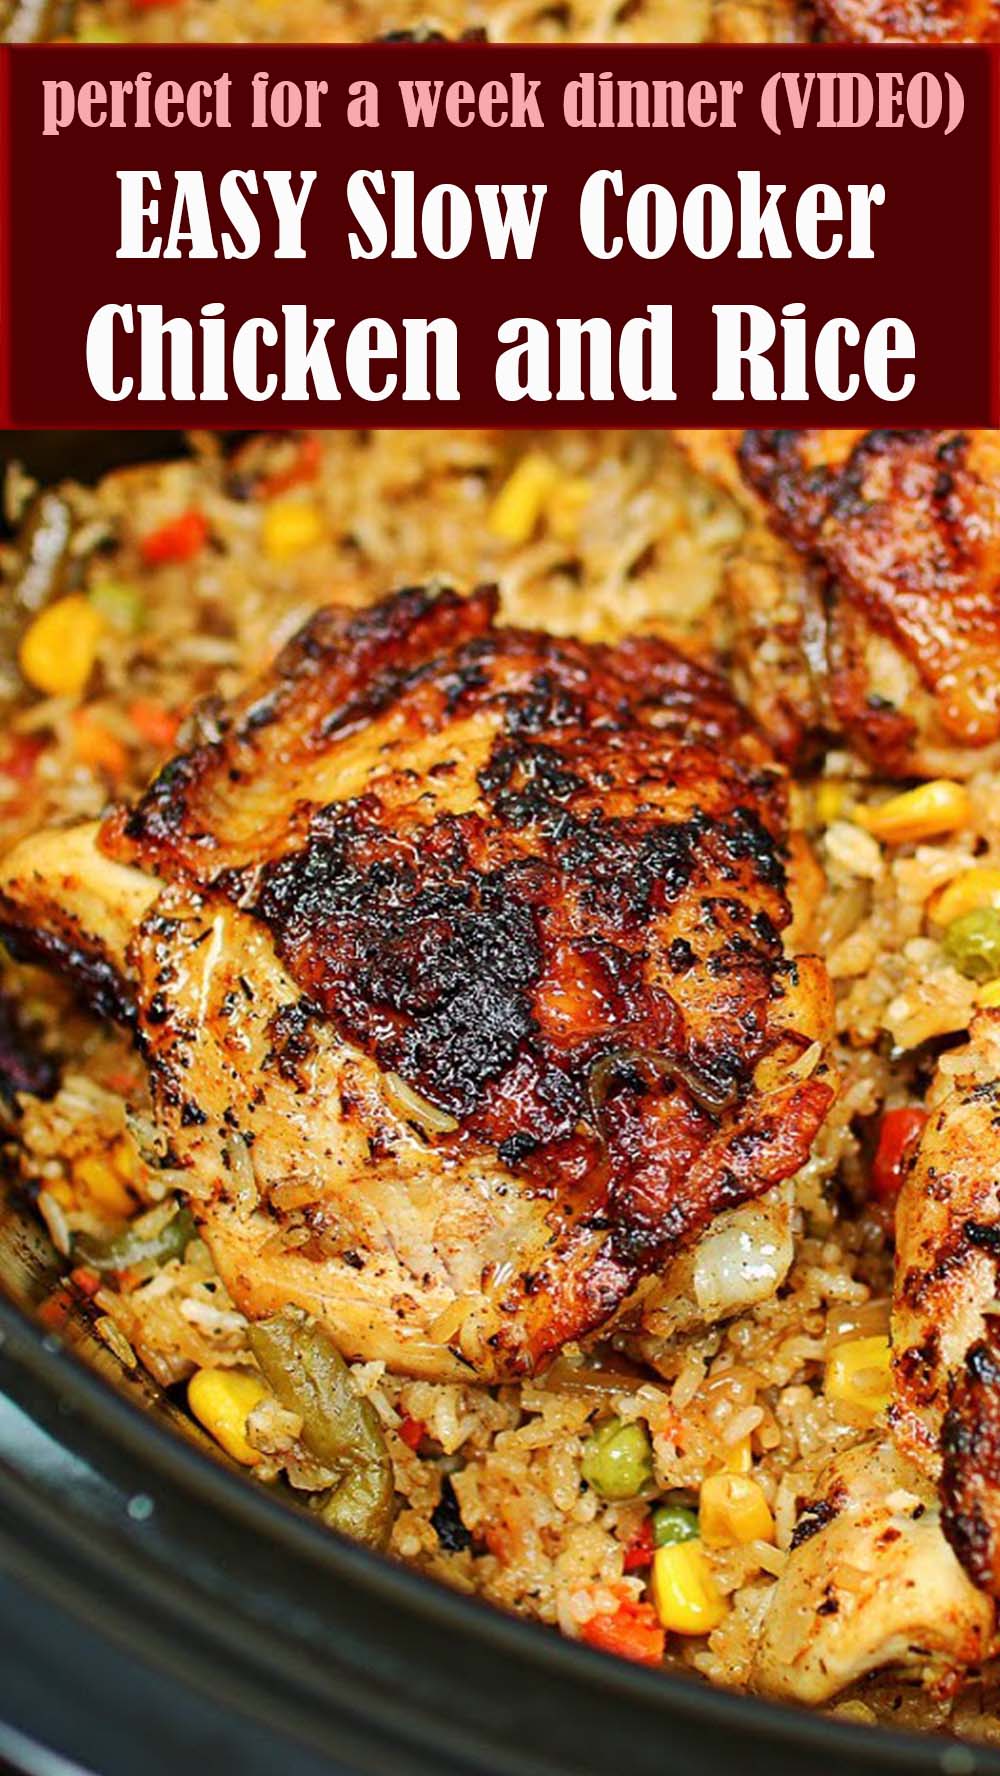 EASY Slow Cooker Chicken and Rice Recipe